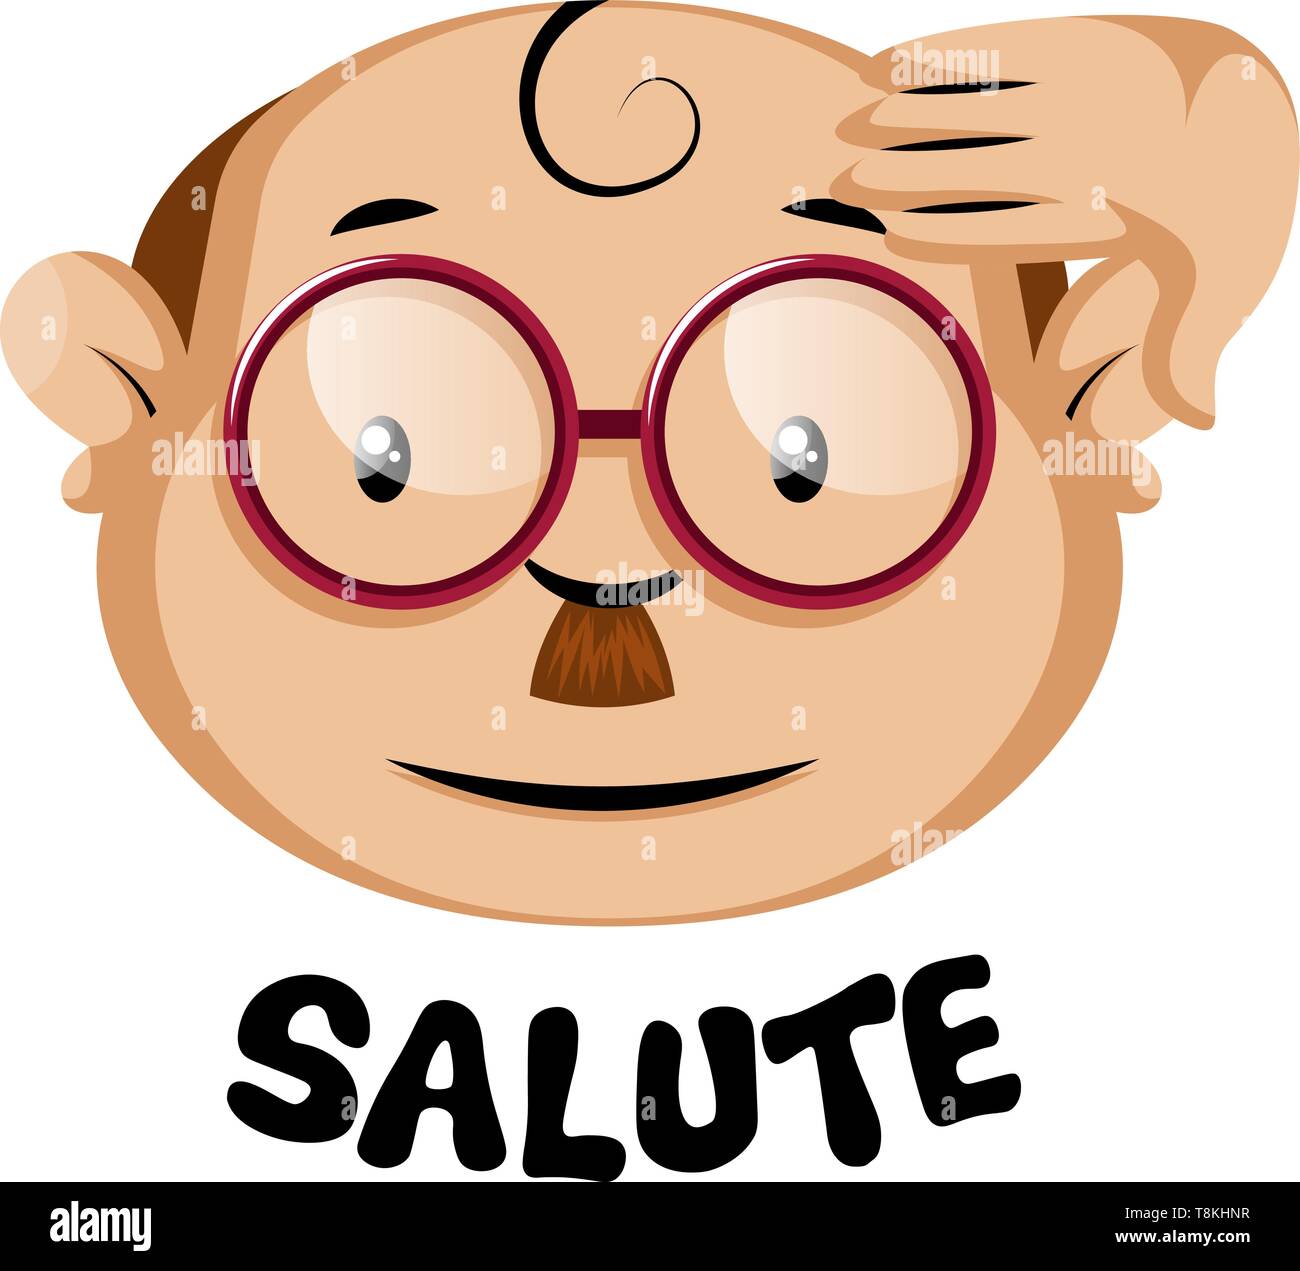 funny-human-emoji-with-a-salute-symbol-and-letters-illustration